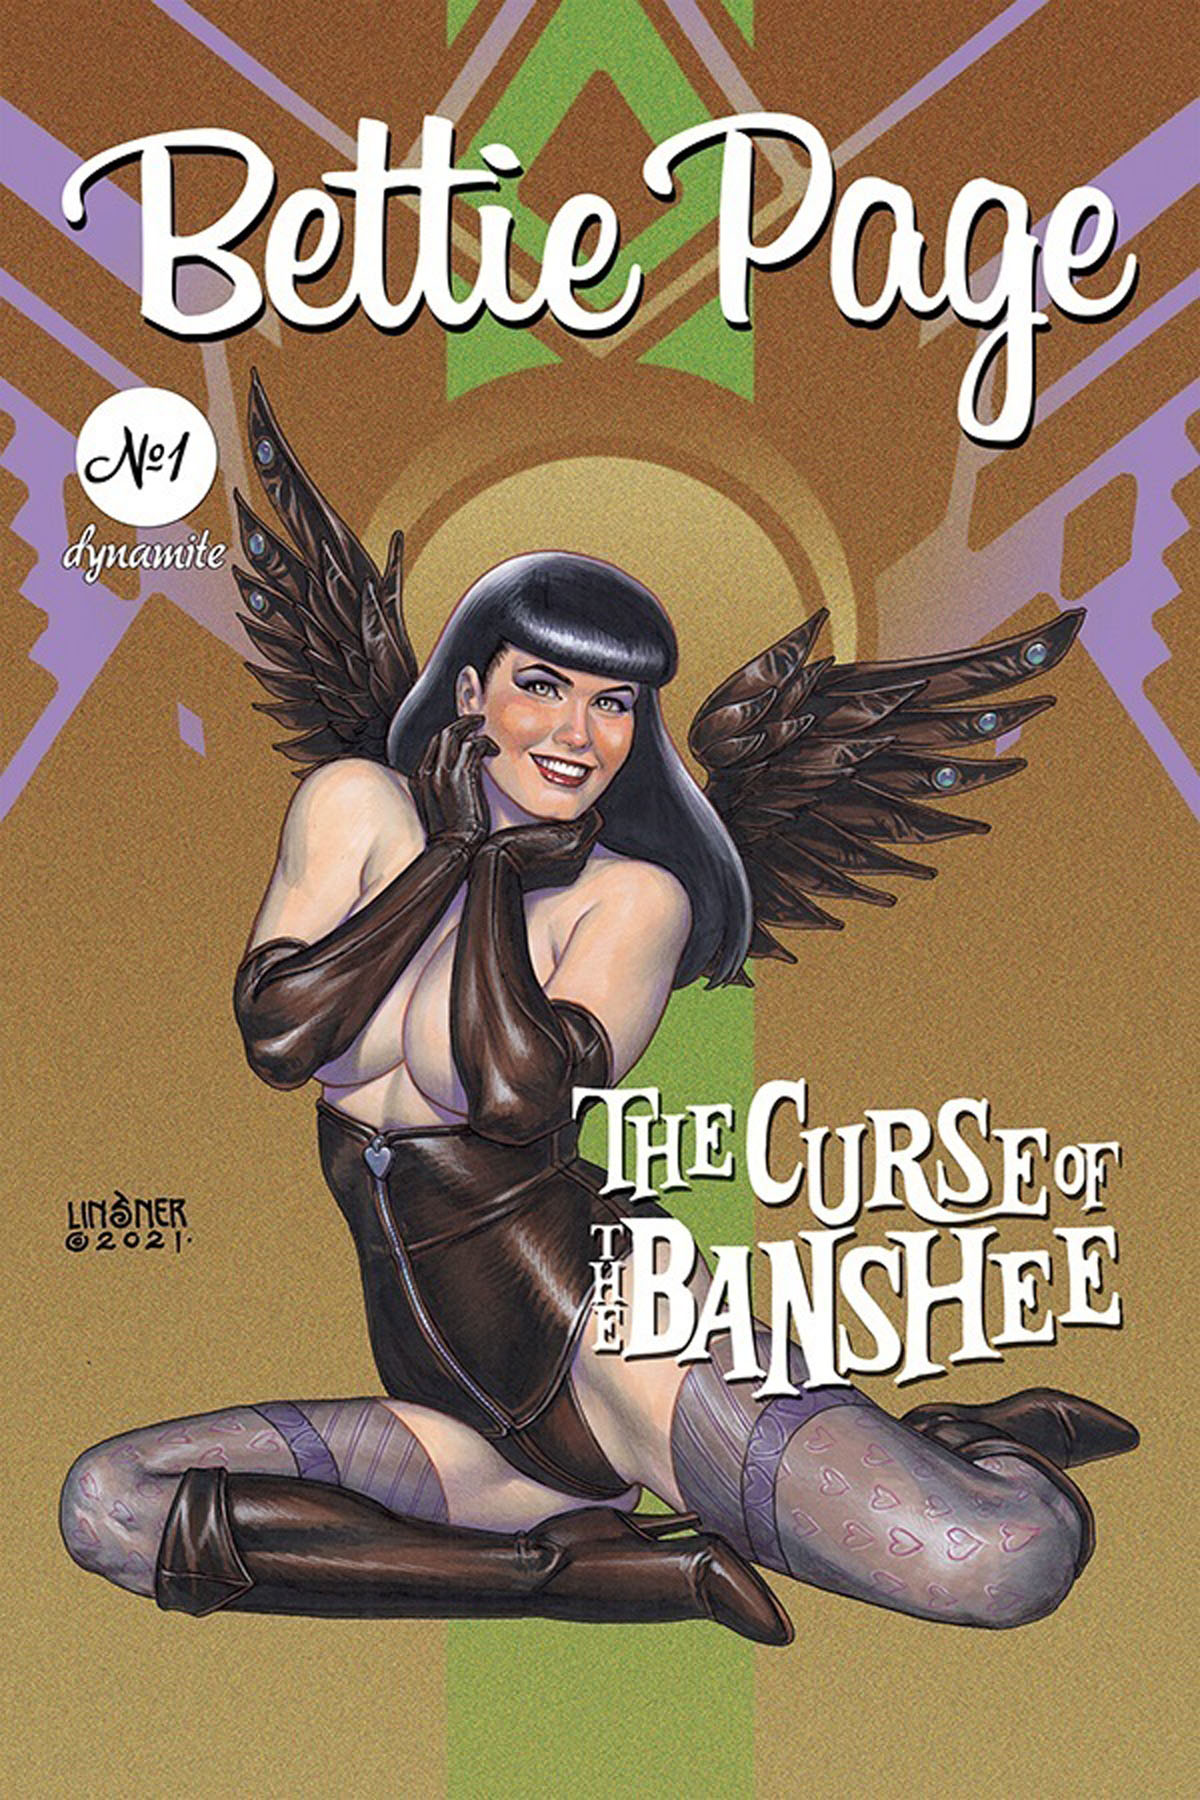 Bettie Page and the Curse of the Banshee #1 cover B by Linsner